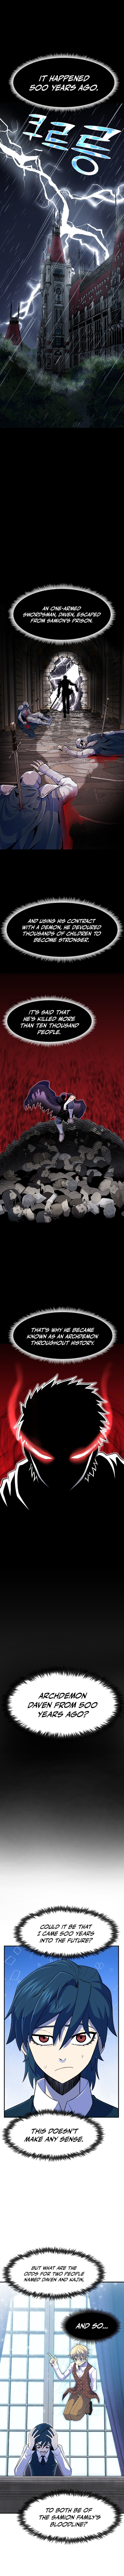 Standard of Reincarnation - Chapter 3 Page 3